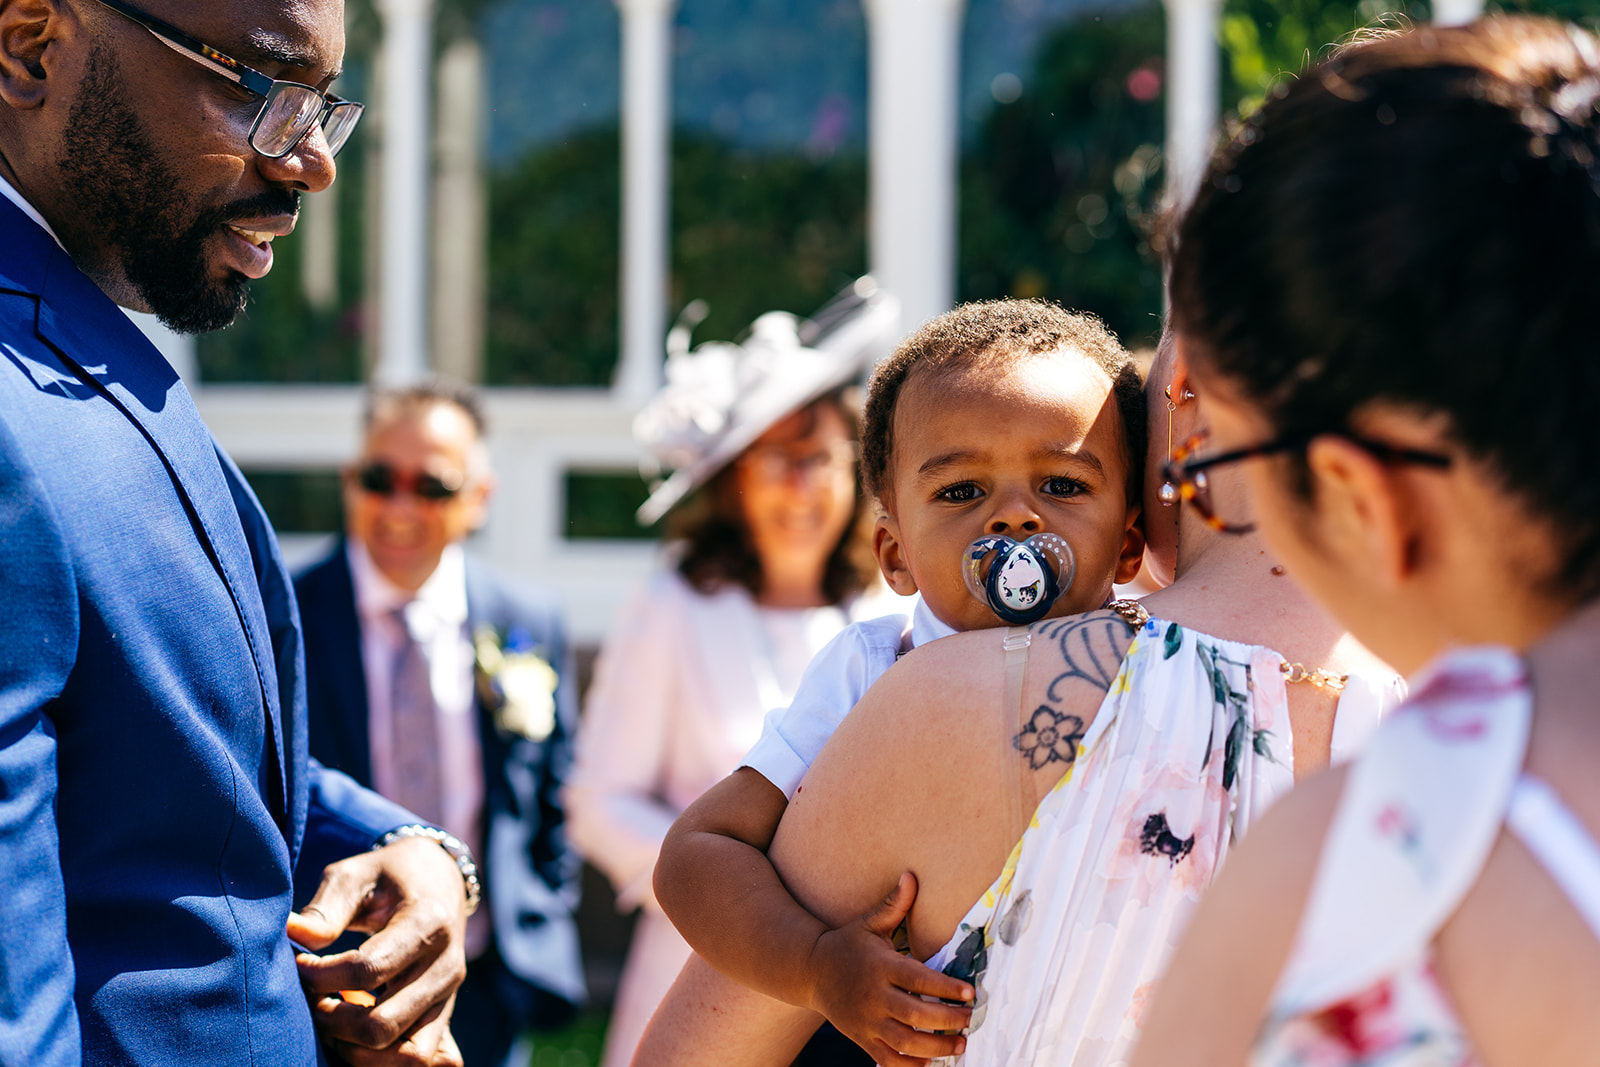 Wedding guests arrive at Sefton Park Palm House. Baby with dummy looks straight down my lens over his mother's shoulder. 